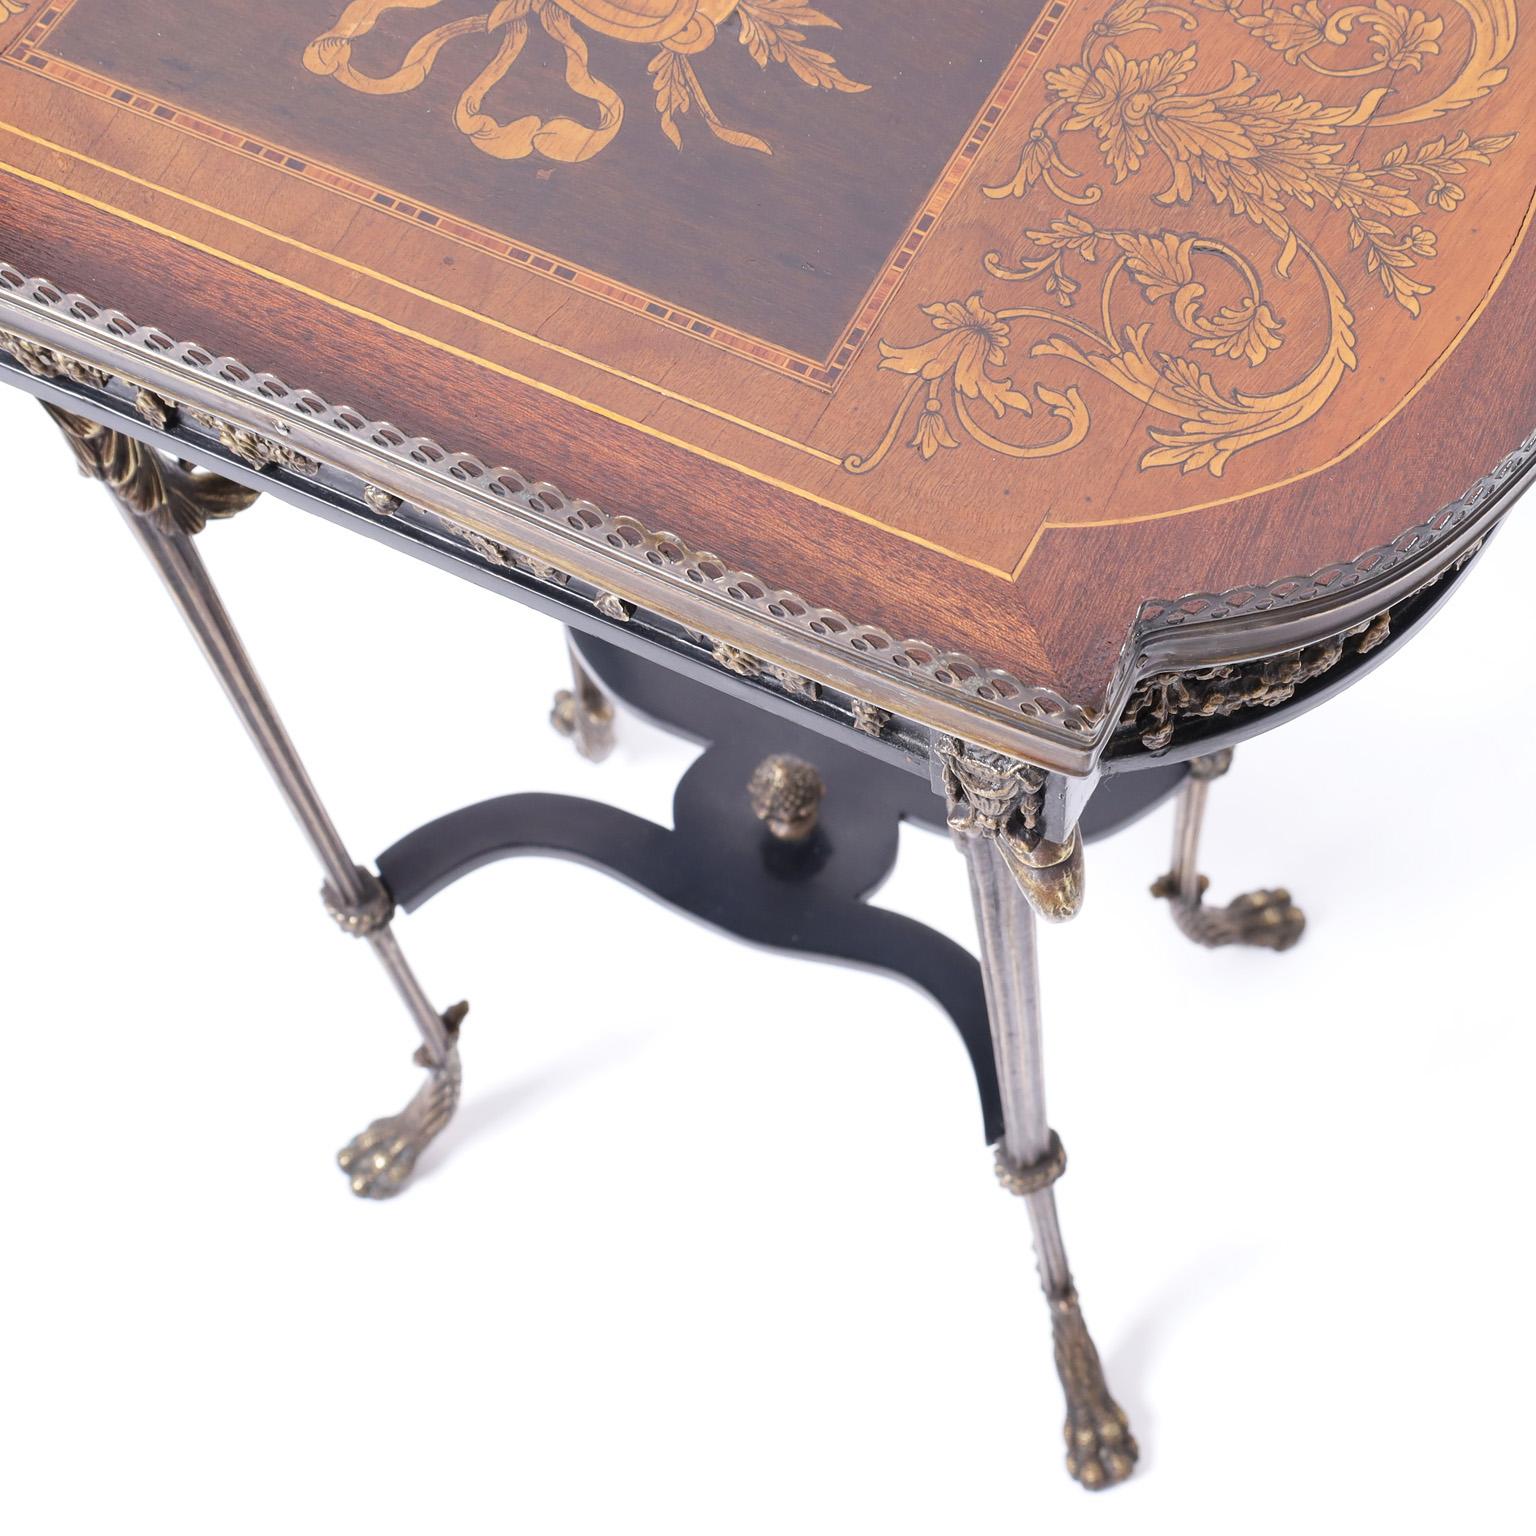 Kingwood Pair of French Inlaid Tables or Stands For Sale